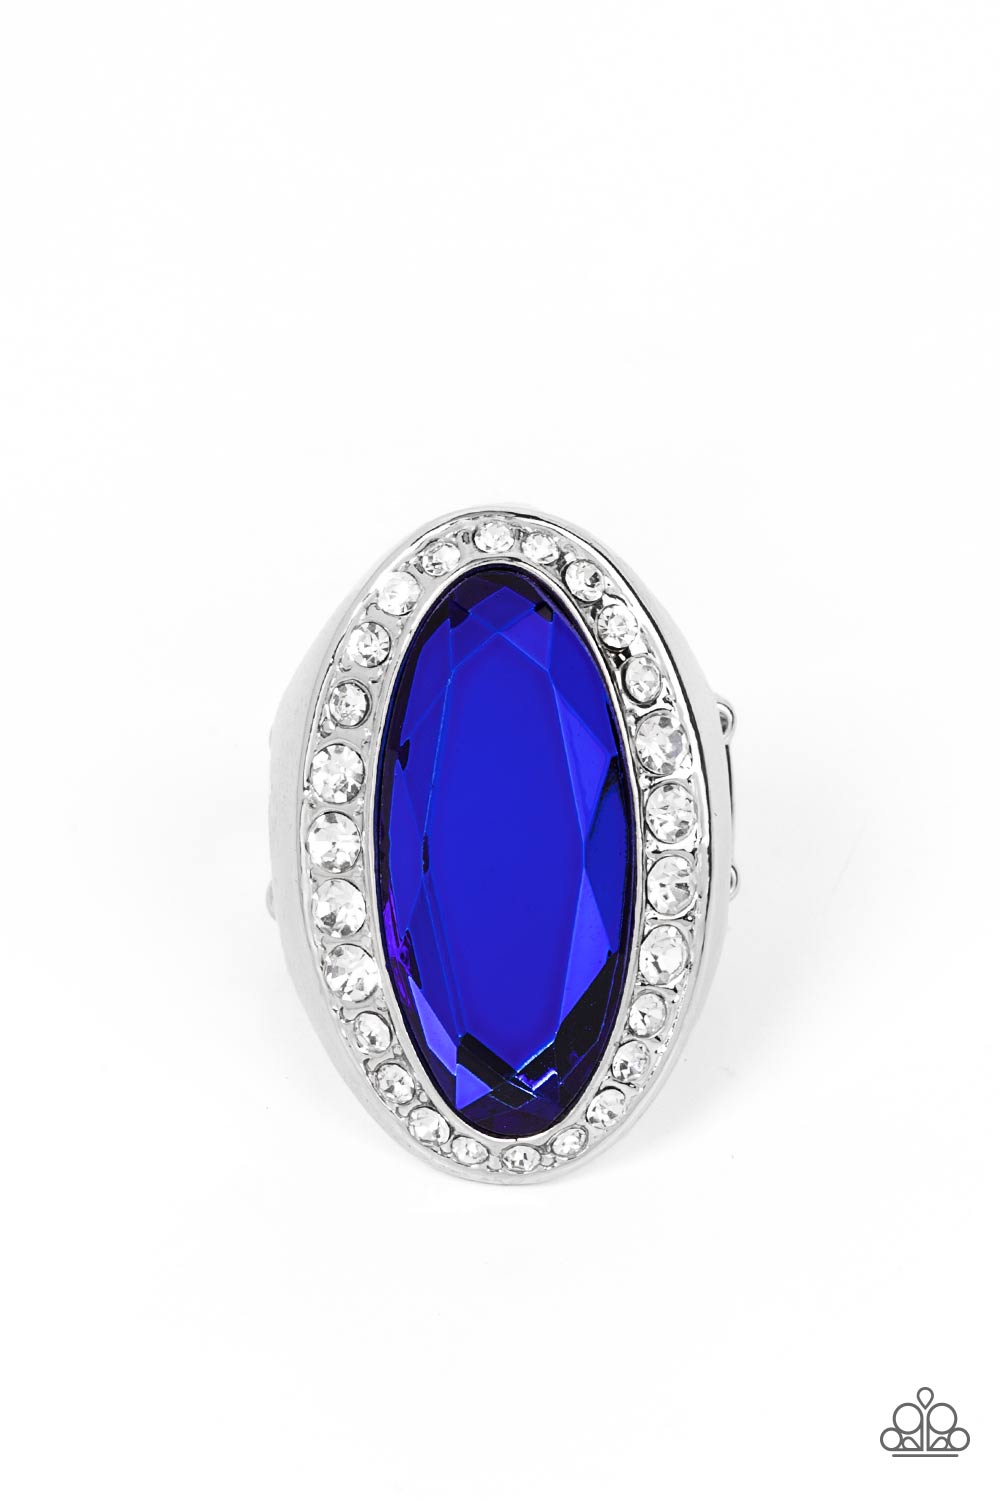 Believe in Bling Blue Rhinestone Ring - Paparazzi Accessories- lightbox - CarasShop.com - $5 Jewelry by Cara Jewels